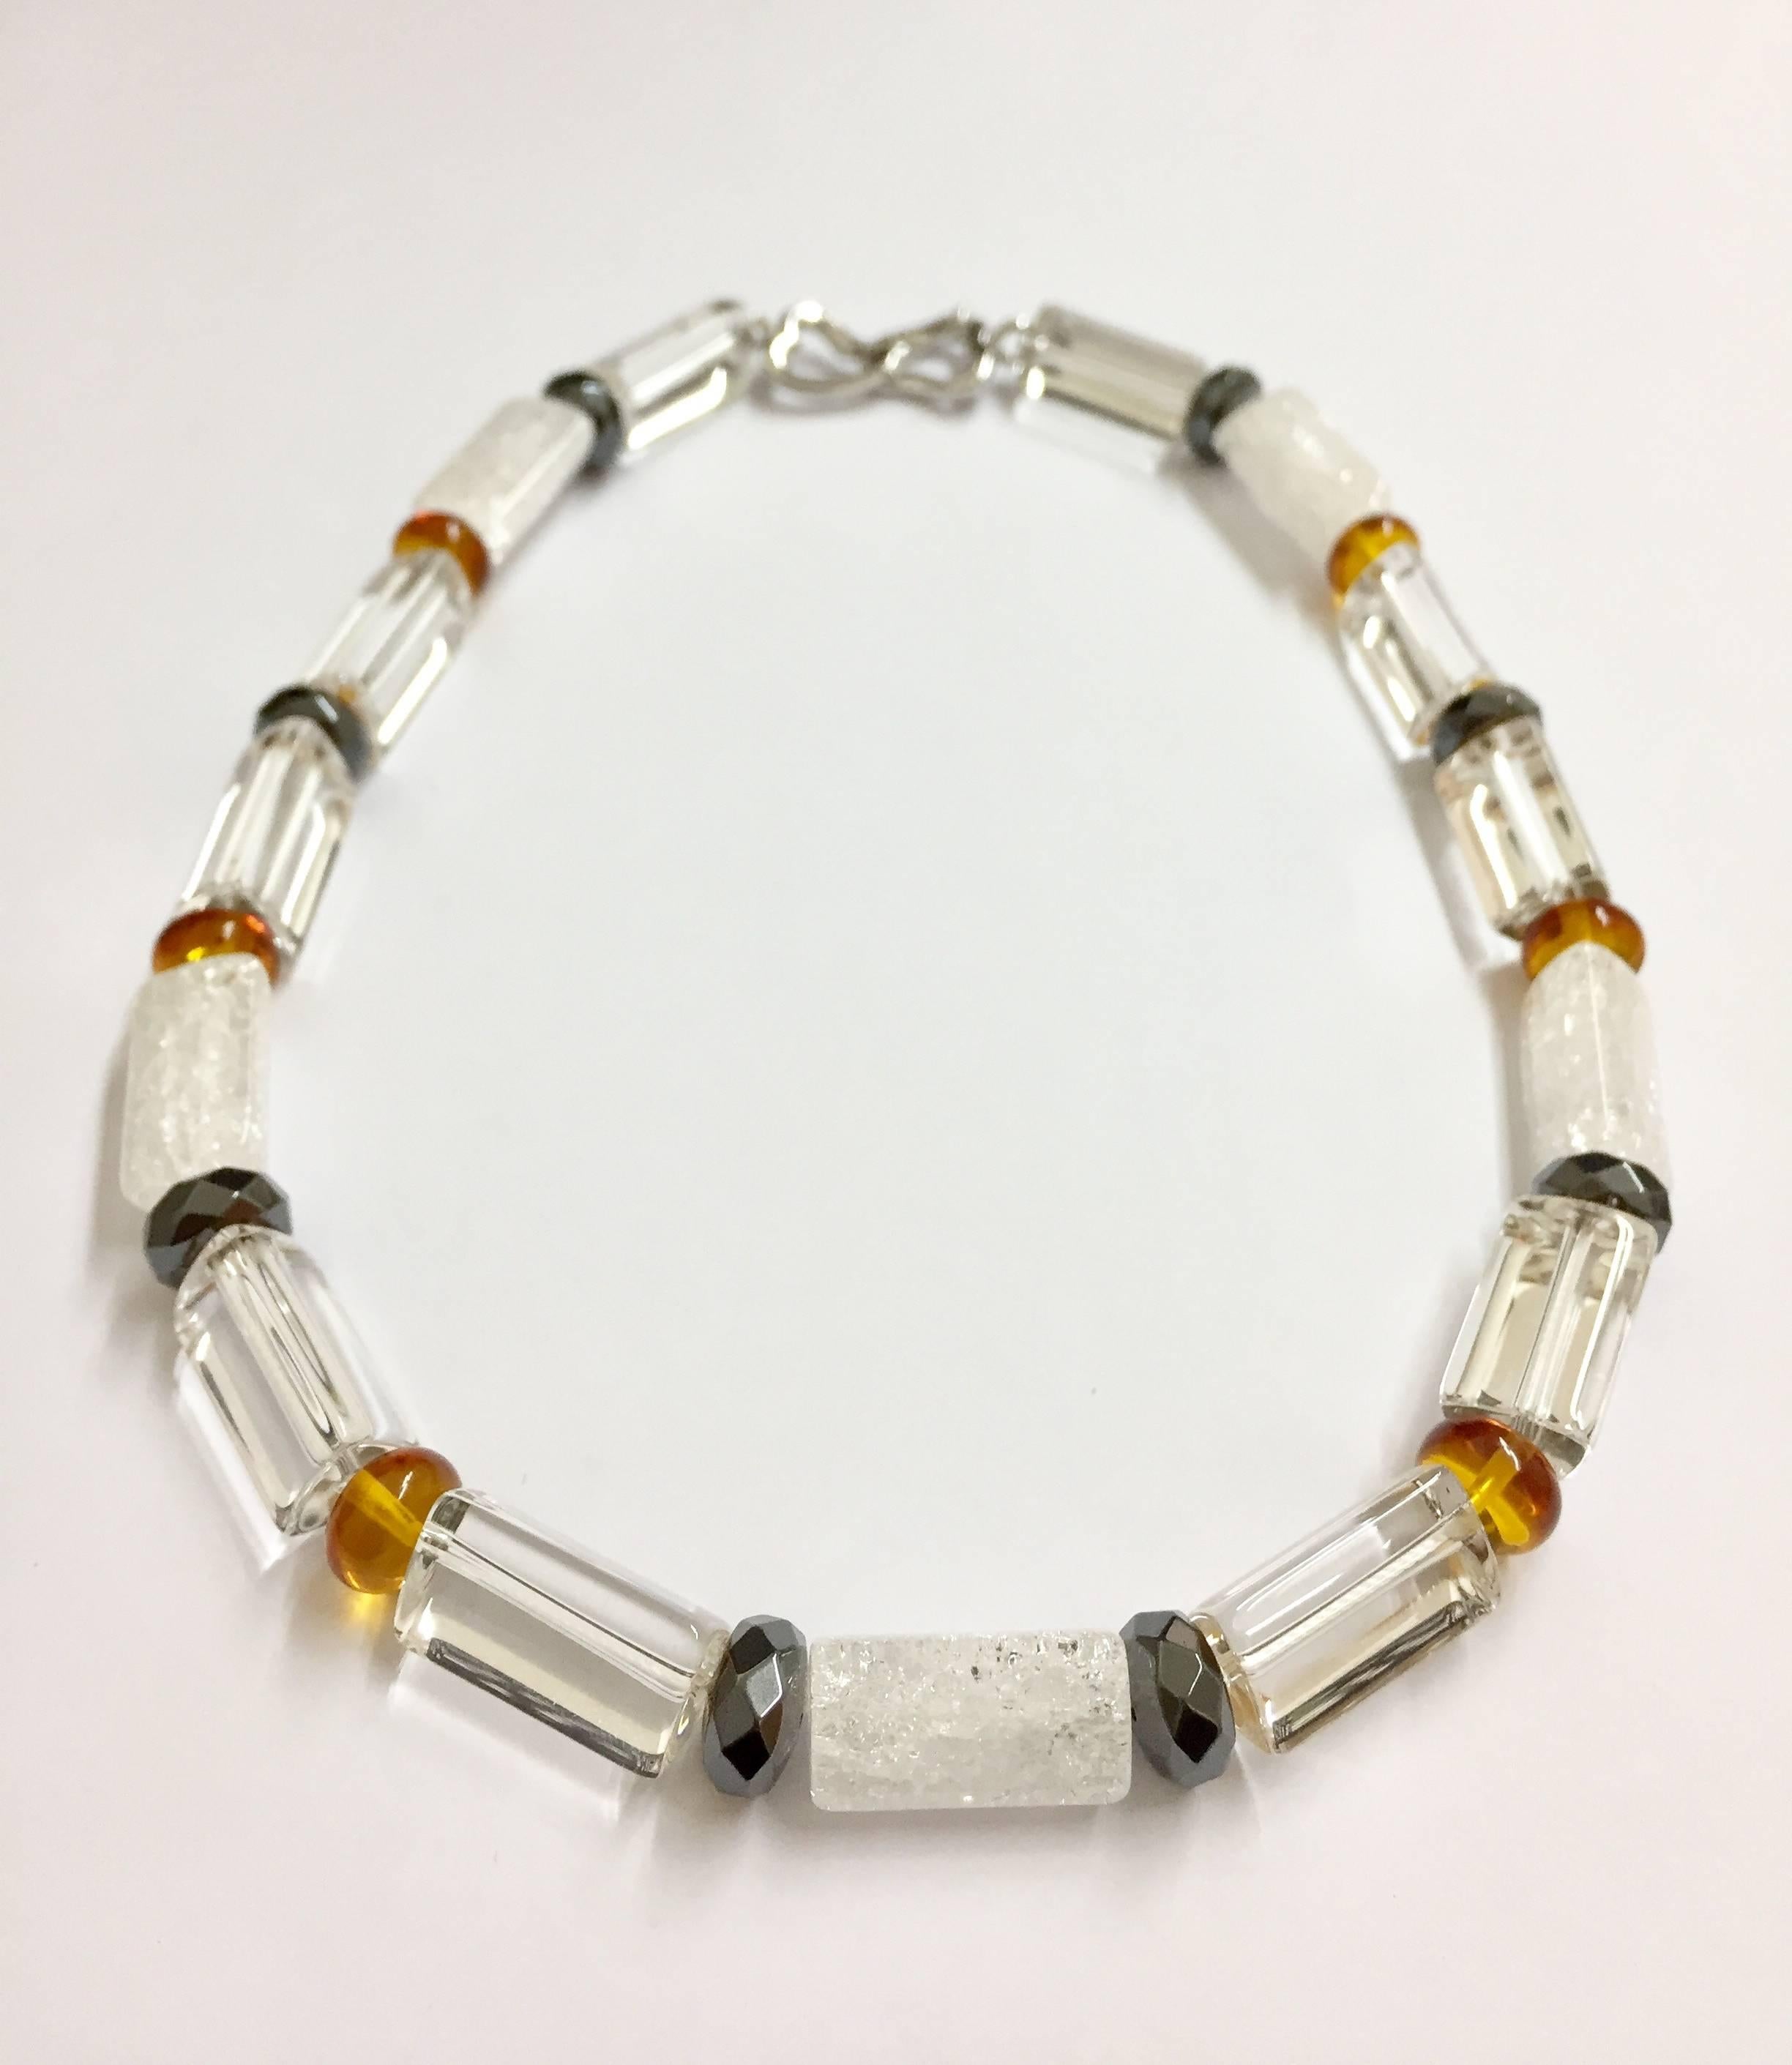 17 inch necklace with faceted crystal, natural amber and faceted hematite discs. Sterling silver 18K white gold plated hook.